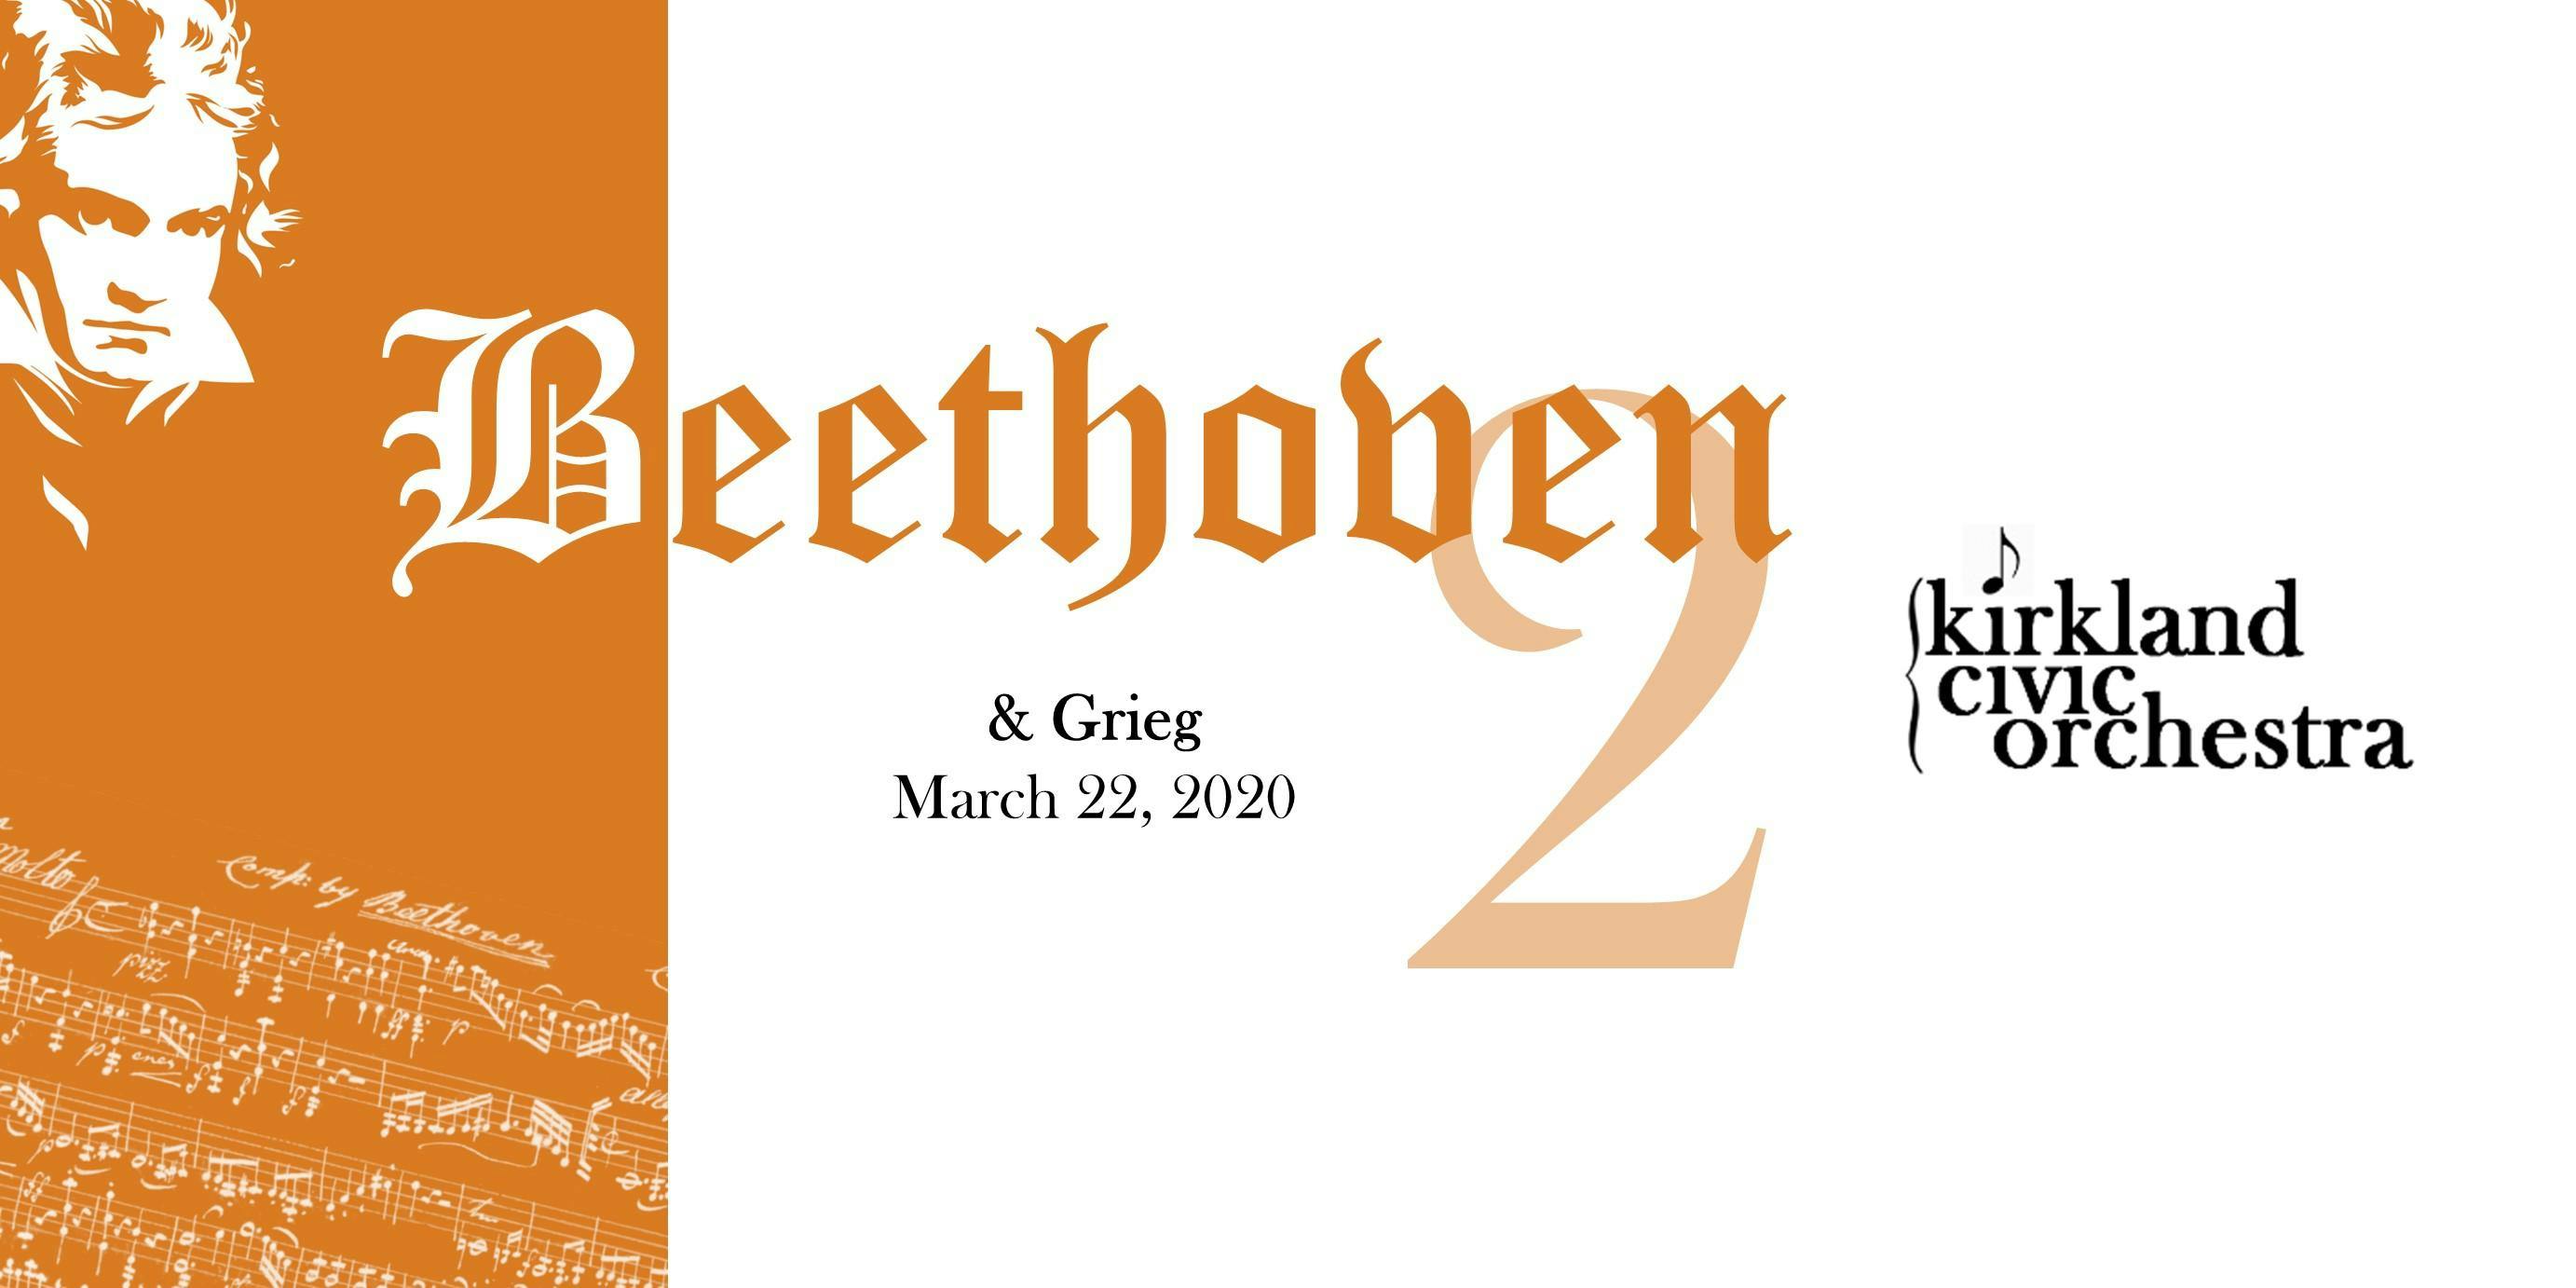 Beethoven & Grieg